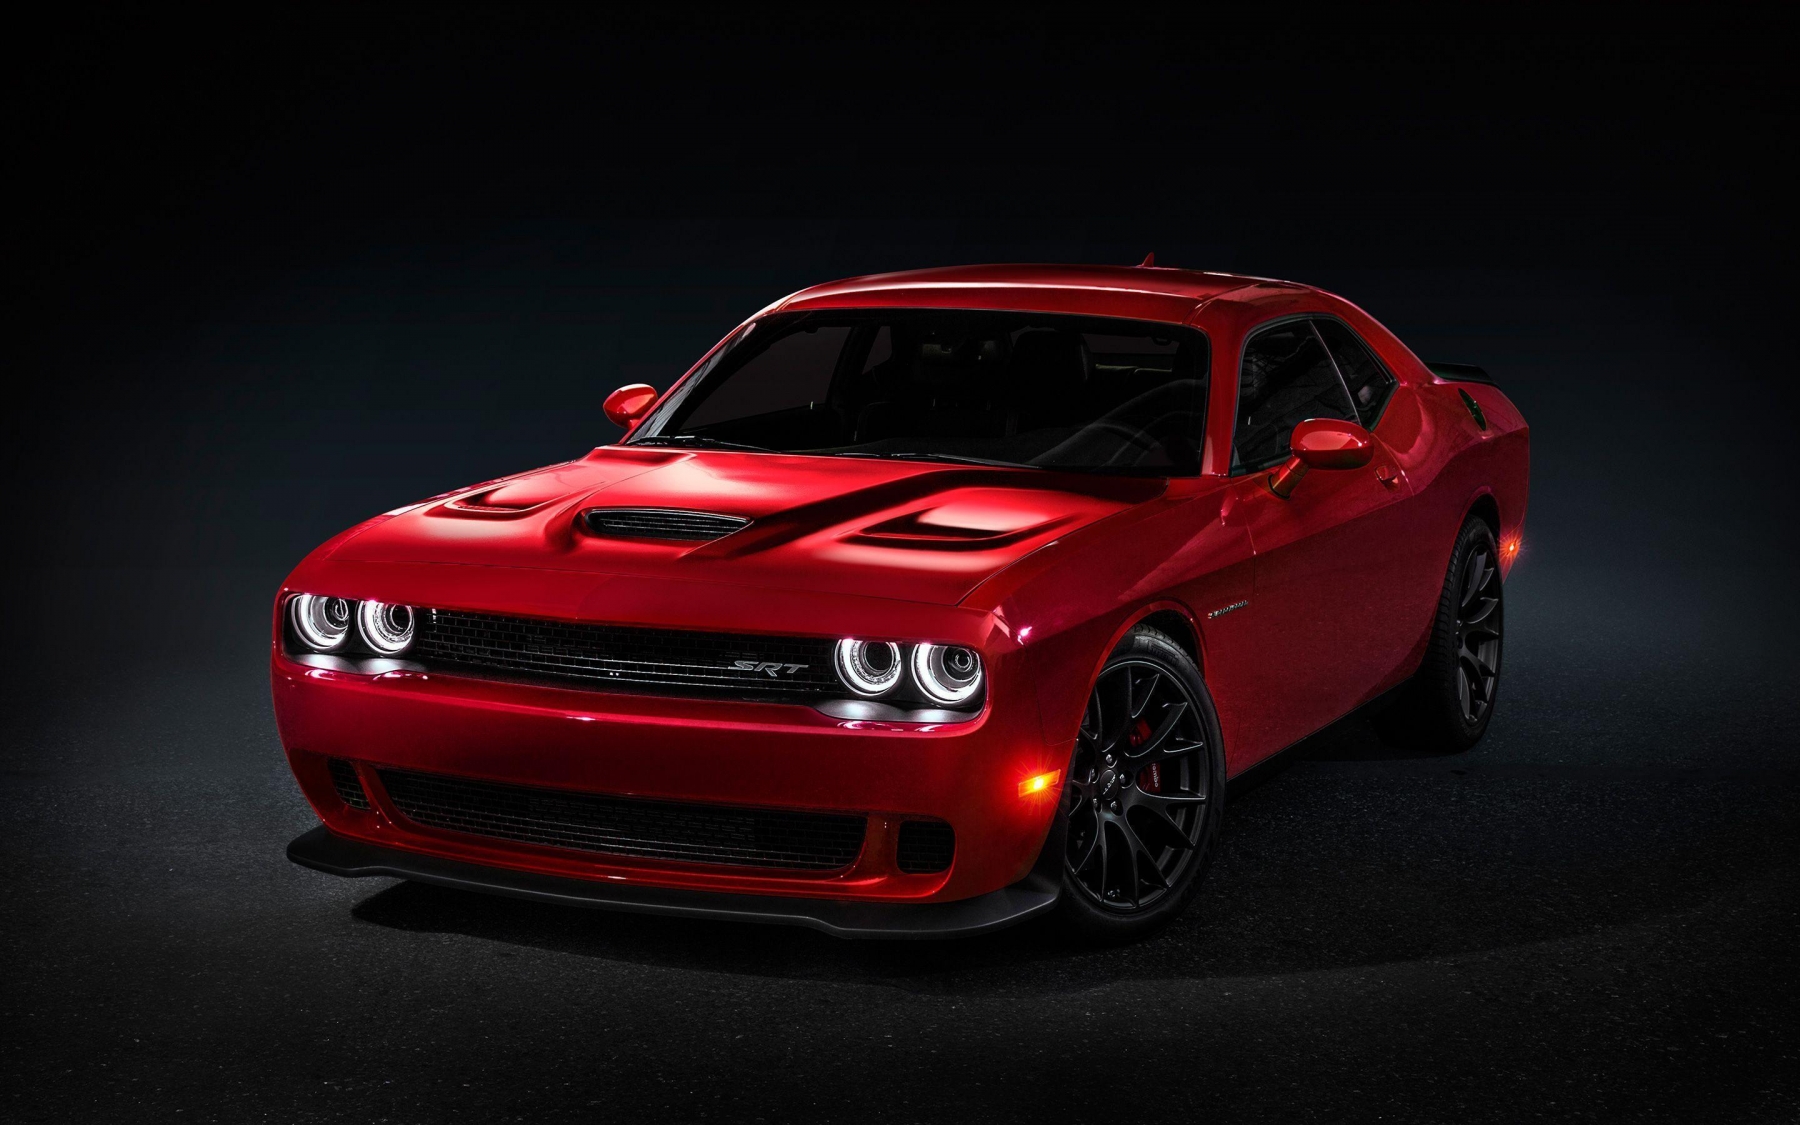 Download wallpaper 1125x2436 dodge challenger srt hellcat muscle car  bloodred car iphone x 1125x2436 hd background 23091